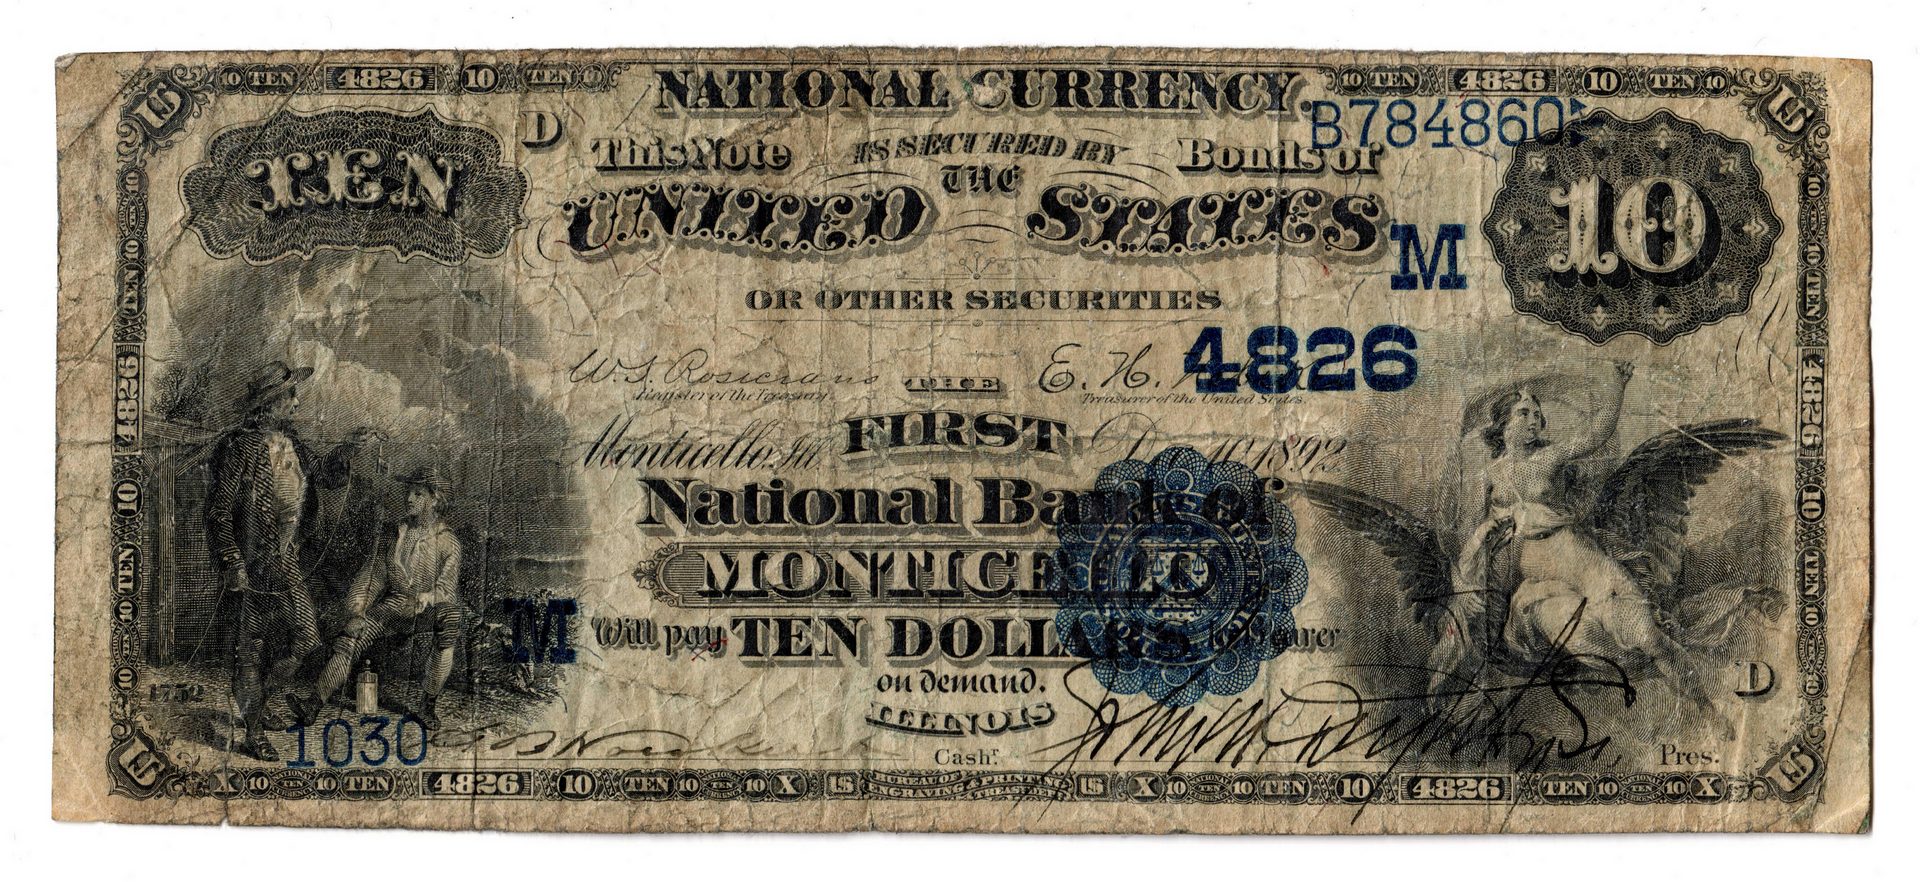 Lot 82: 1882 $10 First National Bank of Monticello Nationa